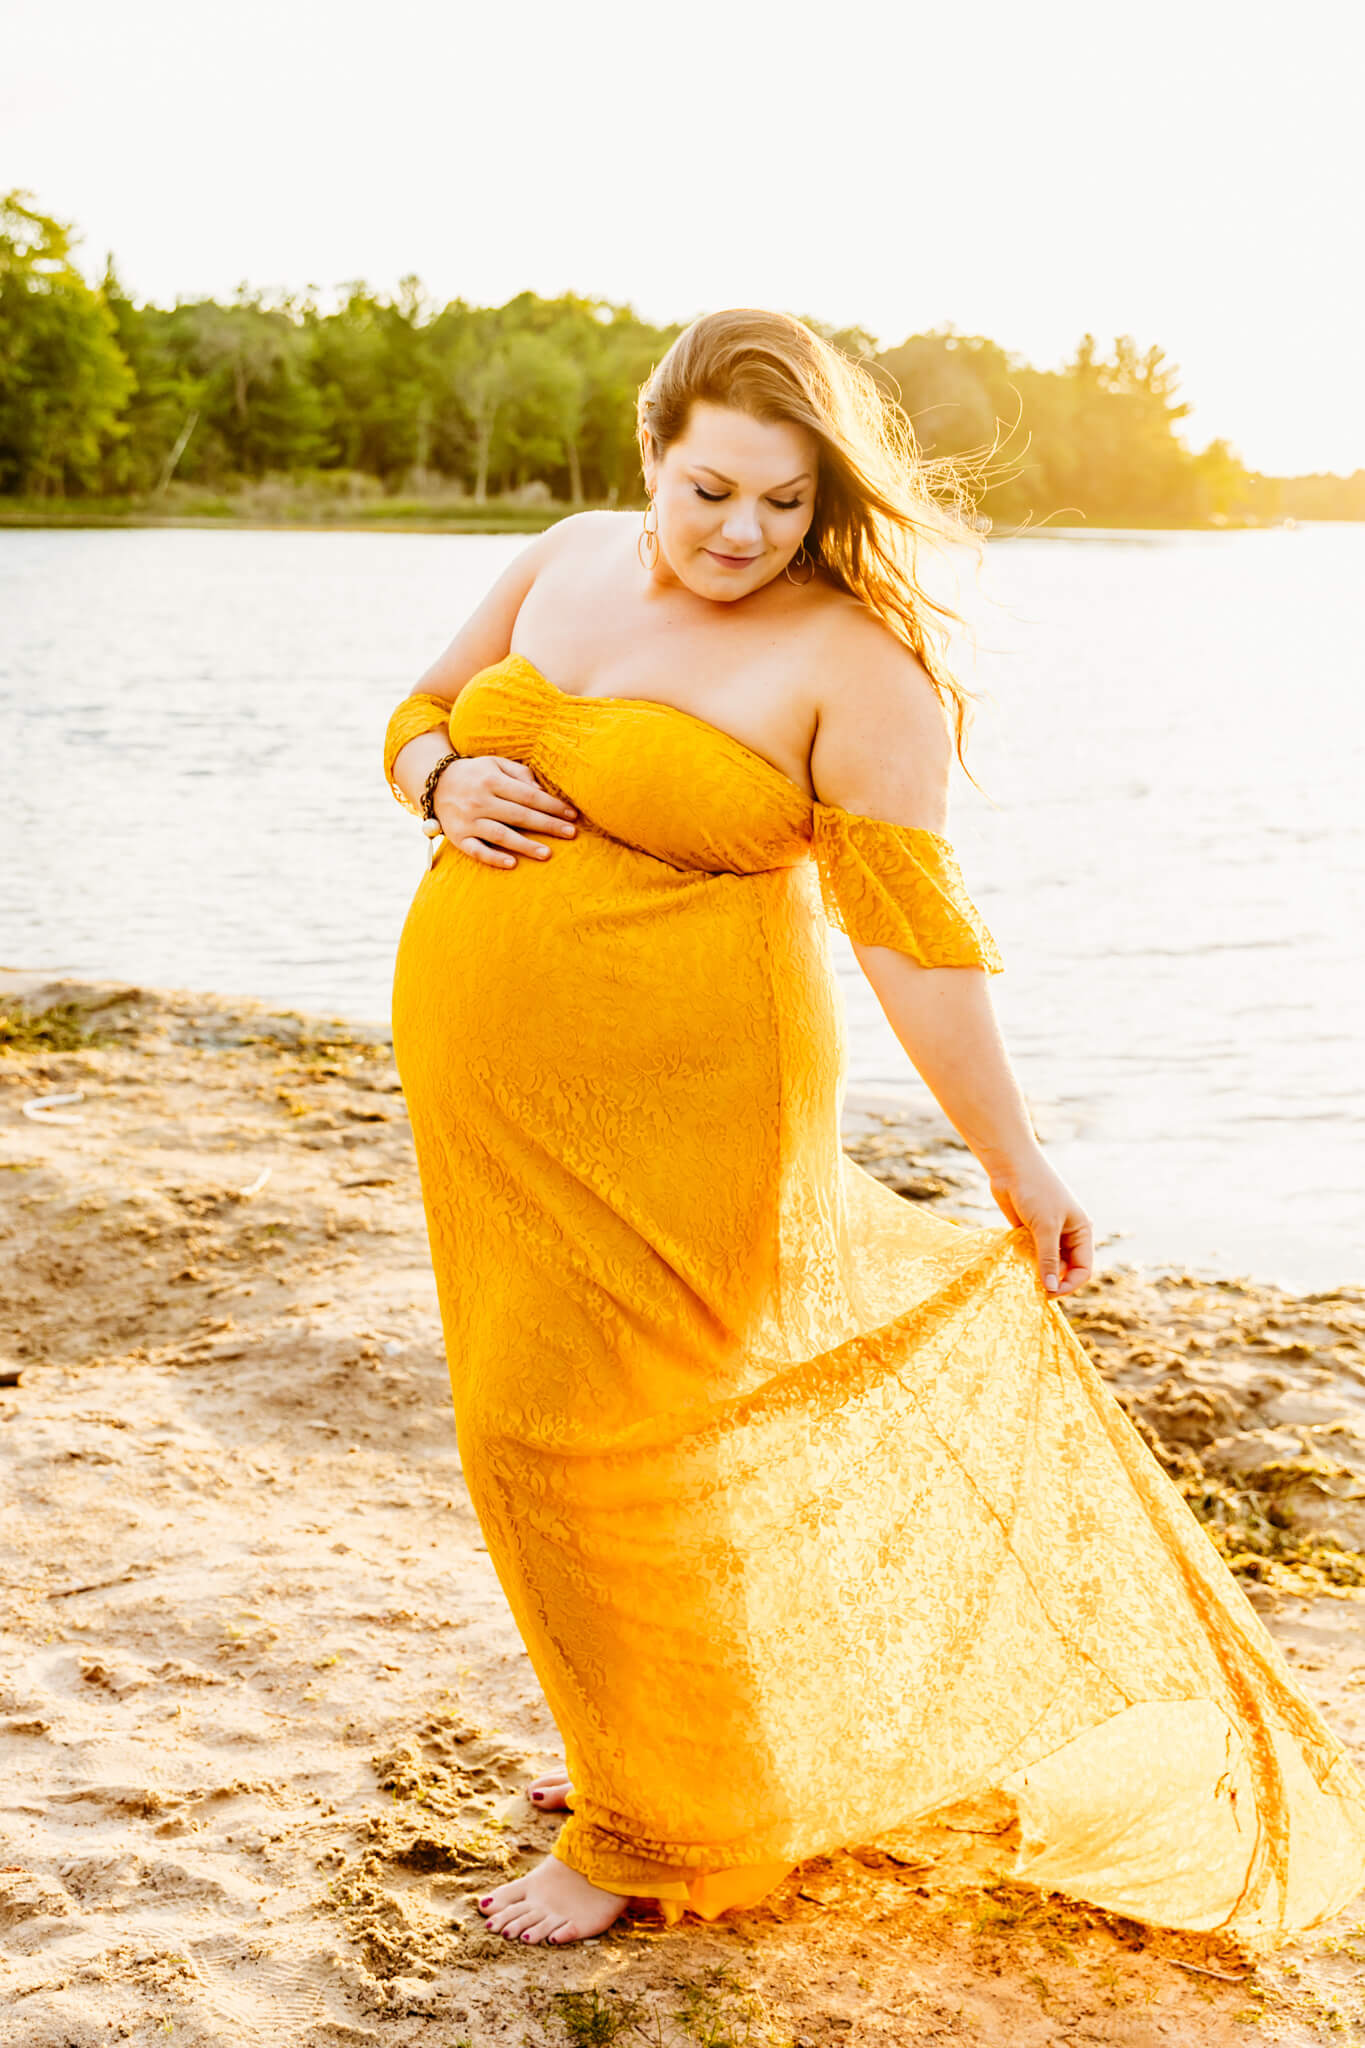 mama to be playing with her yellow lace dress as she walks along the beach with the sun setting behind her